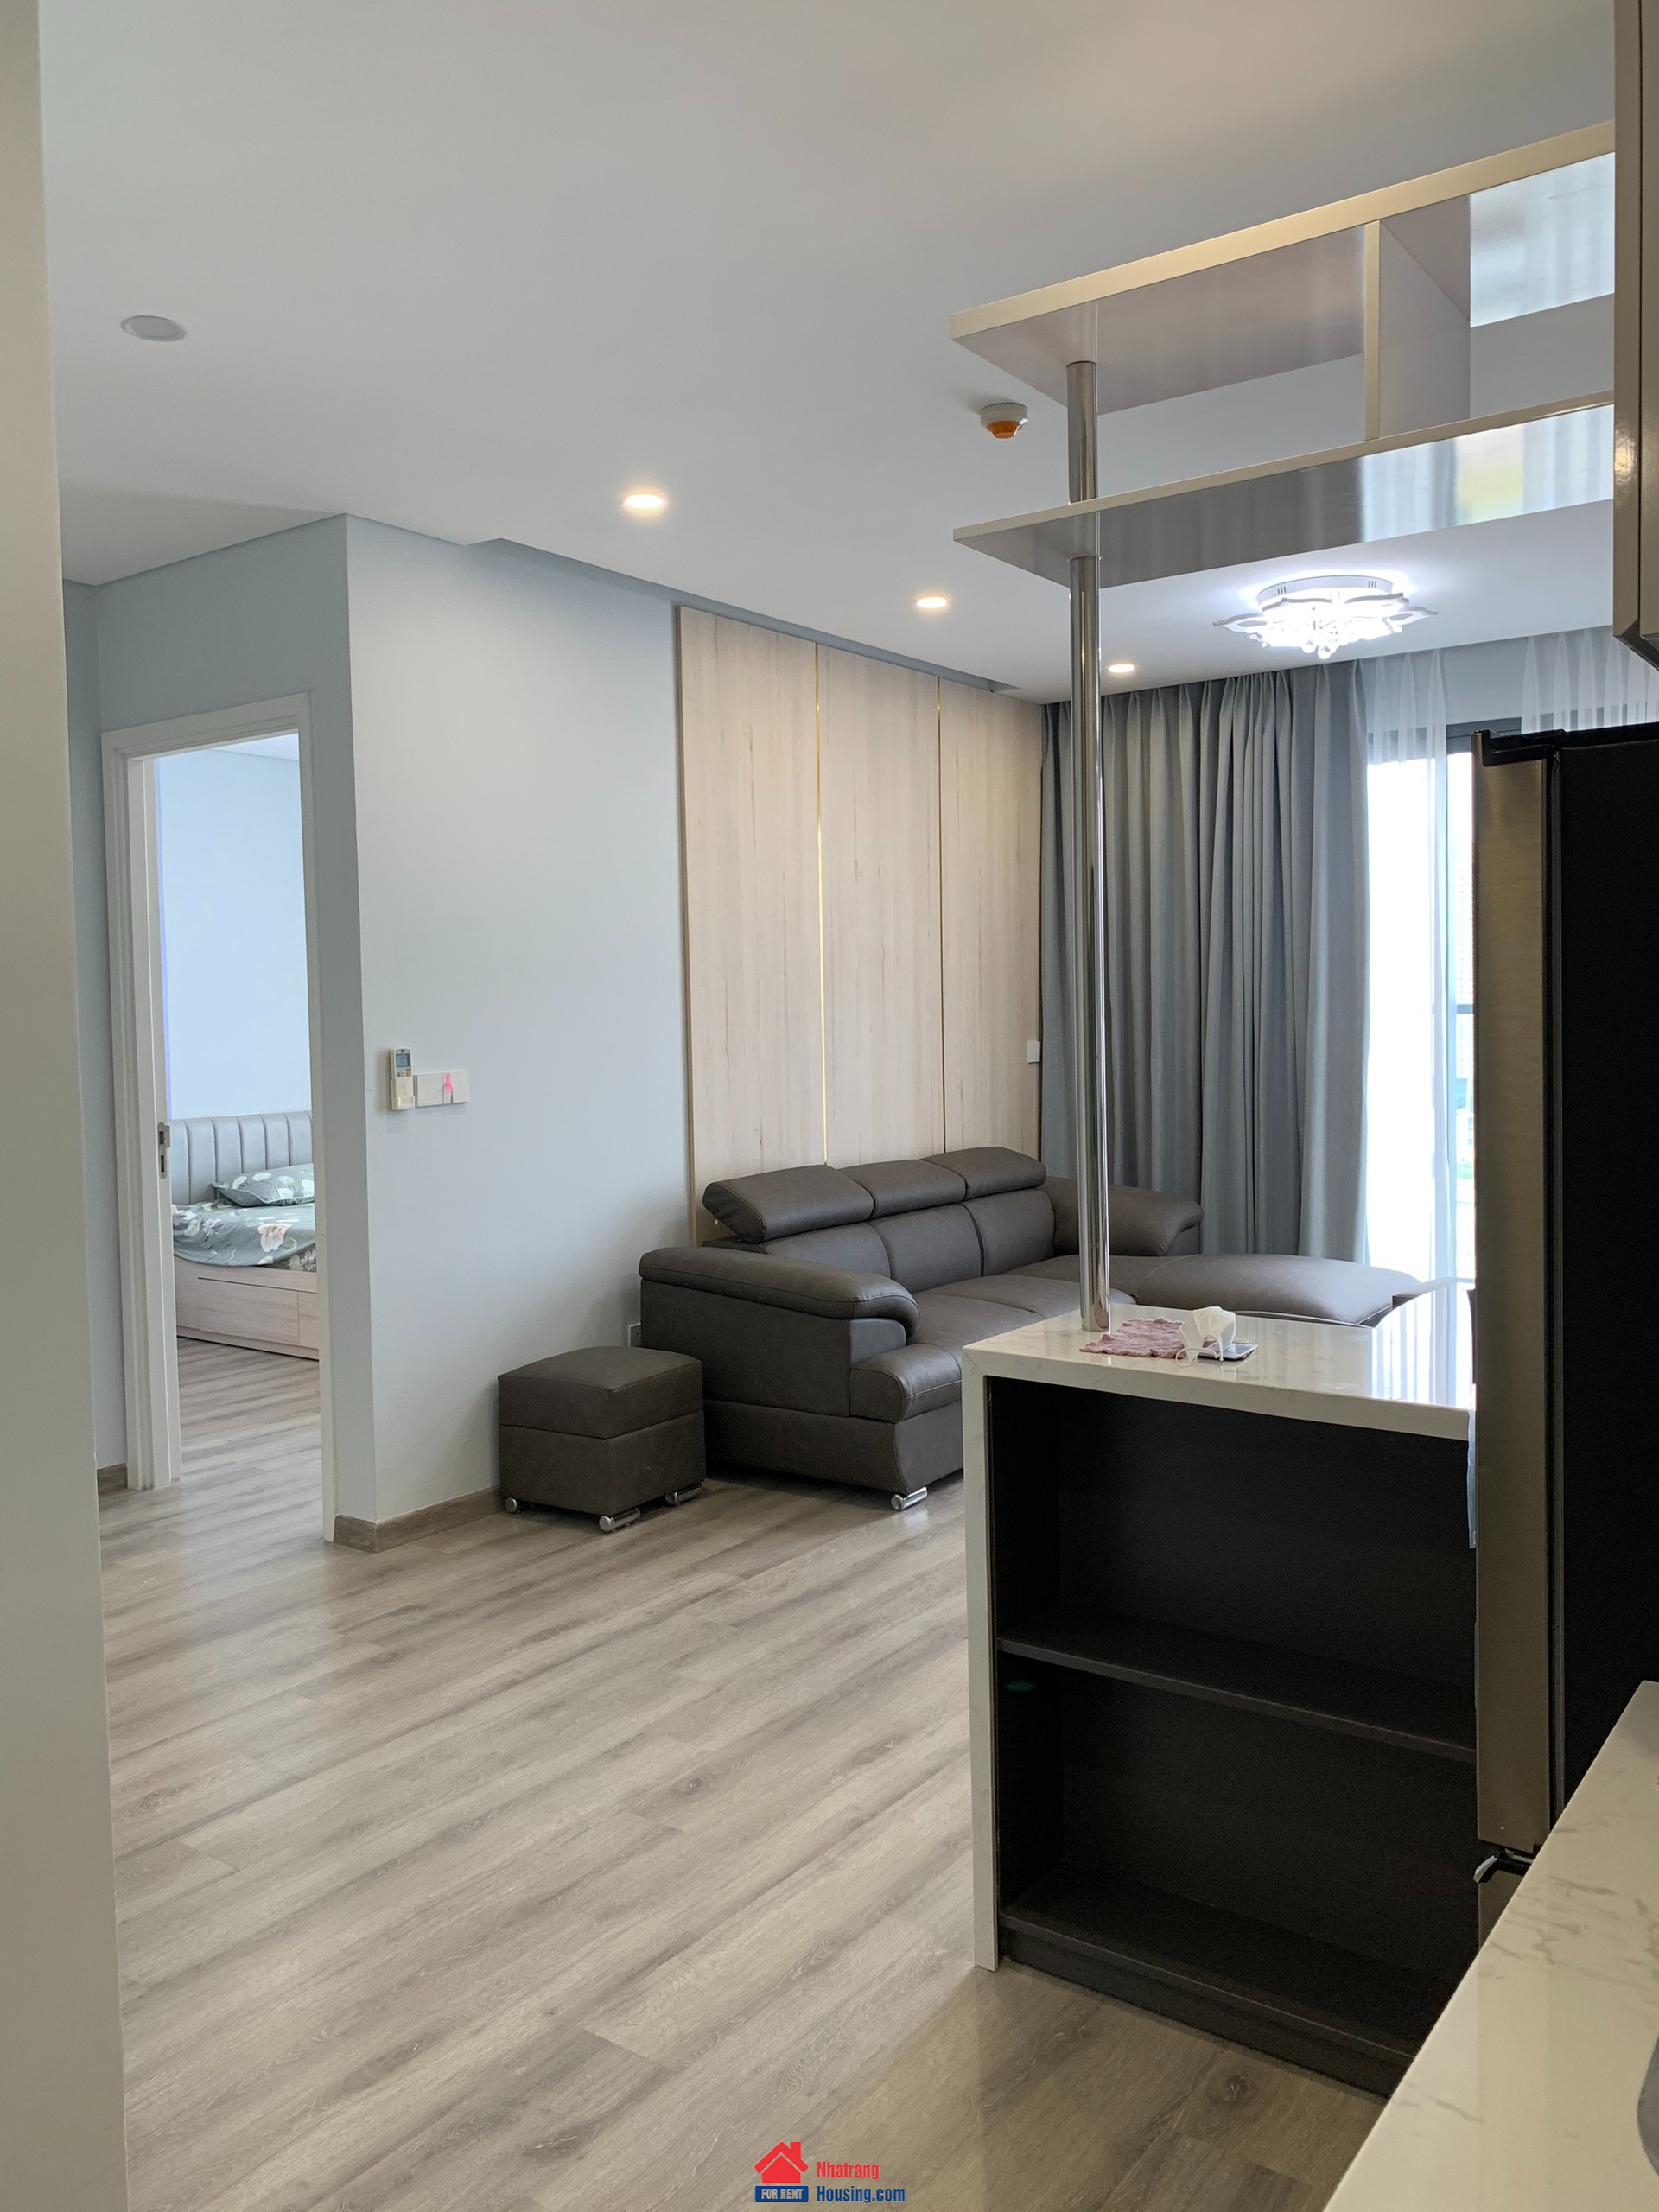 Marina Suites Nha Trang Apartment for rent | 2 bedrooms, 83m2 | 12 million